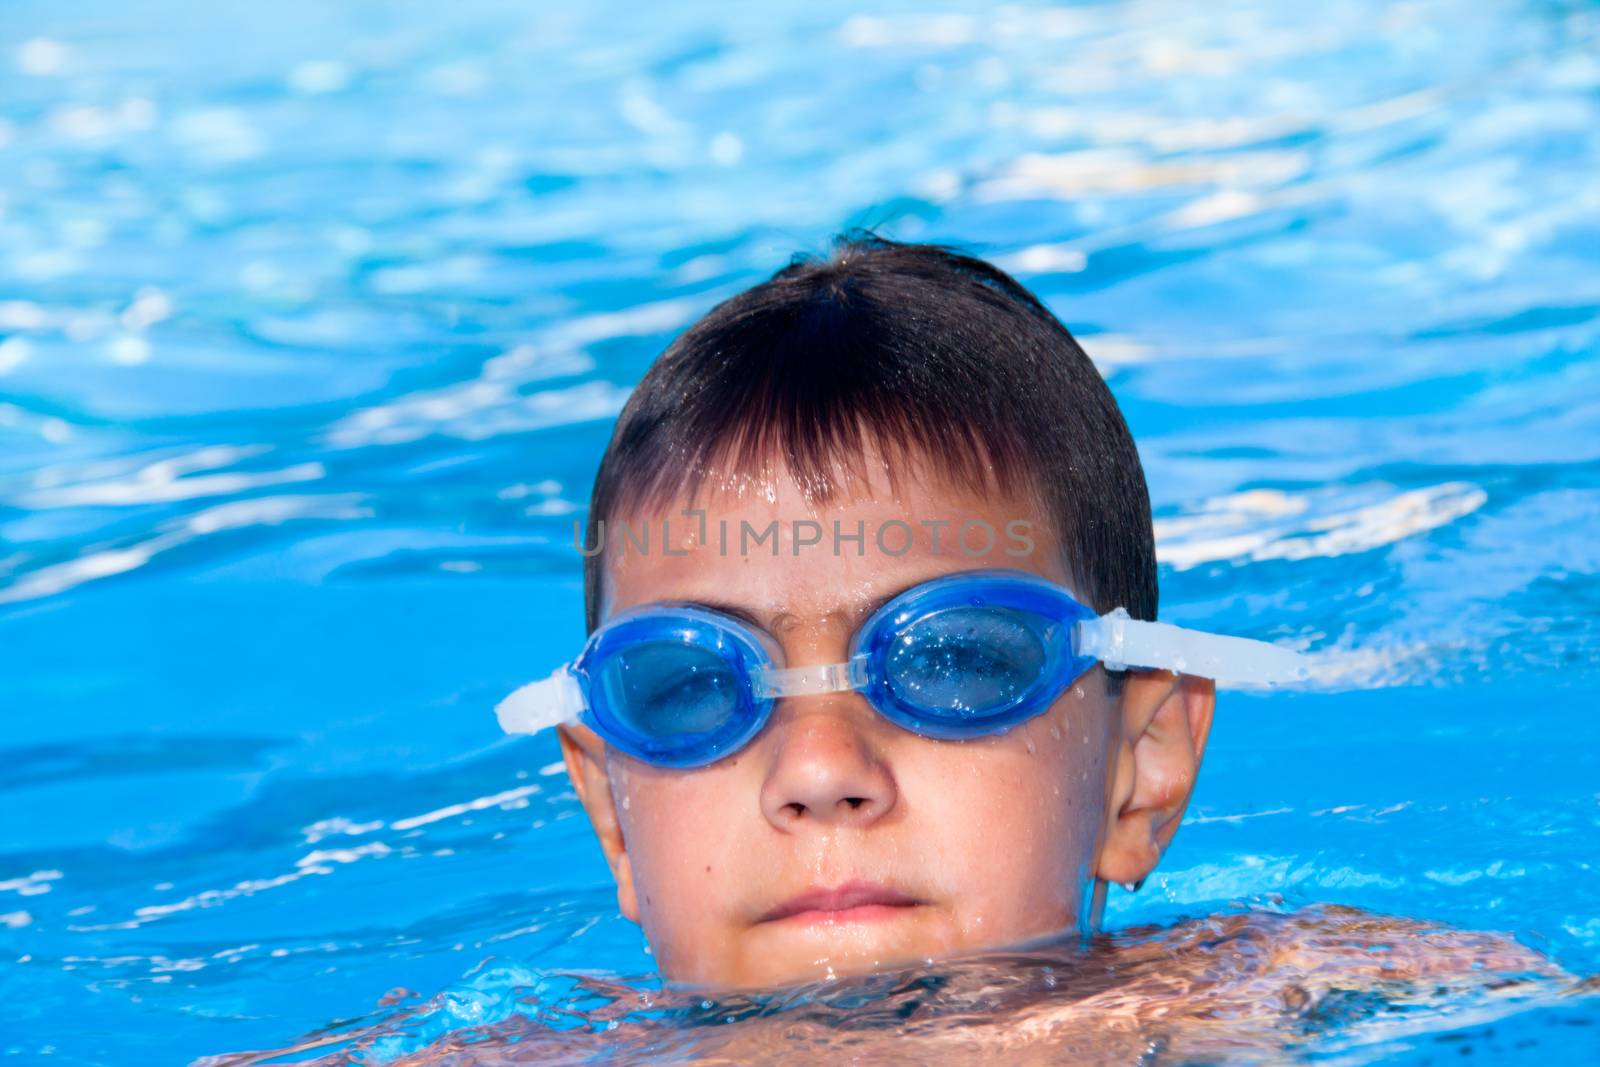 The boy floats in pool by client111